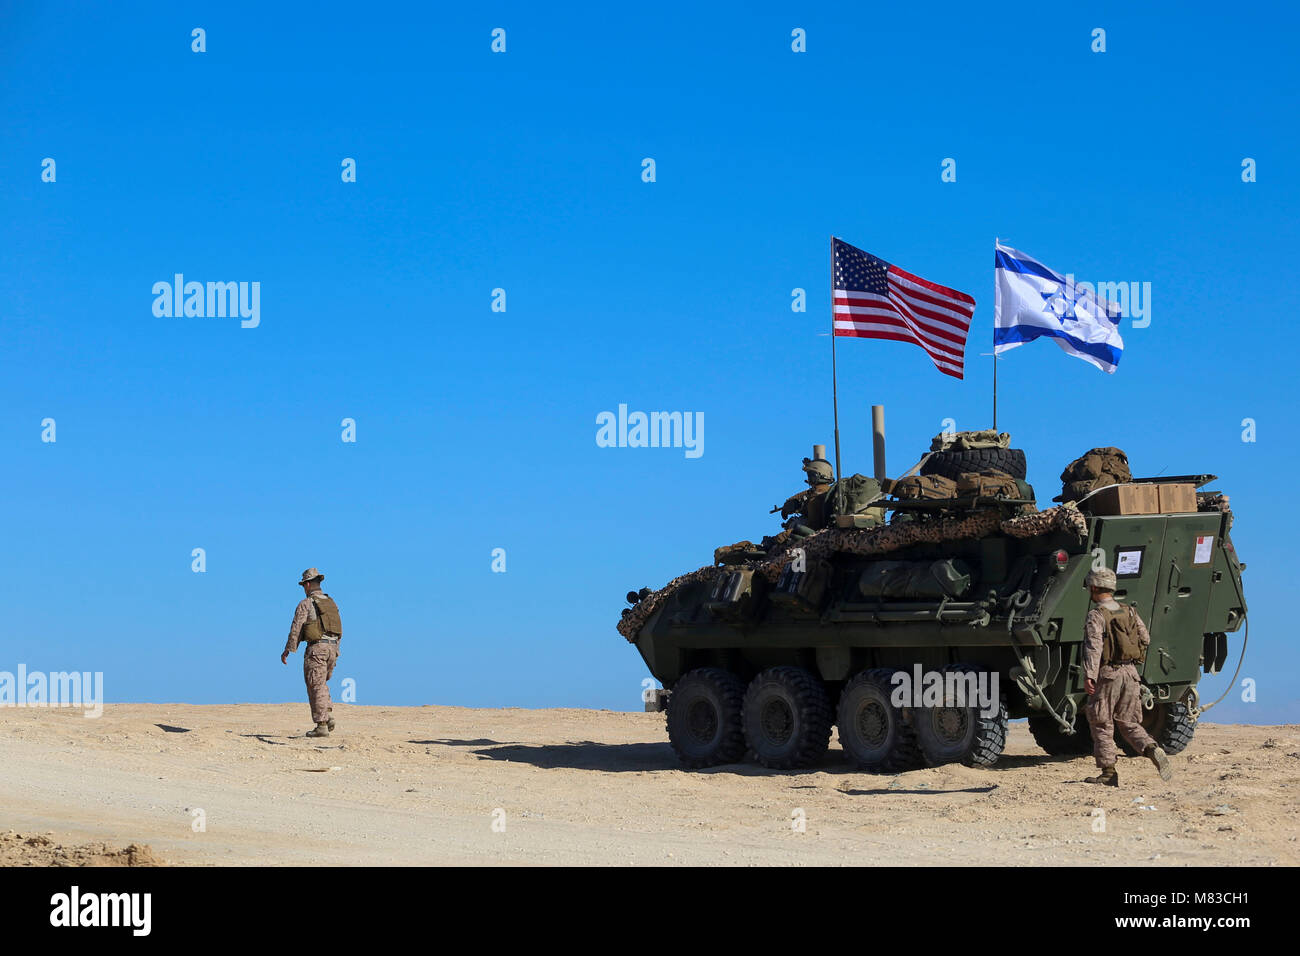 NATIONAL TRAINING CENTER, ISRAEL (March 11, 2018) U.S. Marine Corps Light Armored Vehicle (LAV) from Battalion Landing Team, 2nd Battalion, 6th Marine Regiment (BLT 2/6), 26th Marine Expeditionary Unit staged prior to training alongside Israeli soldiers as part of exercise Juniper Cobra, Mar. 11, 2018. The 26th MEU is participating in Juniper Cobra with the Israeli Defense Force in order to improve interoperability and hone both forces’ skills in a variety of environments. Stock Photo